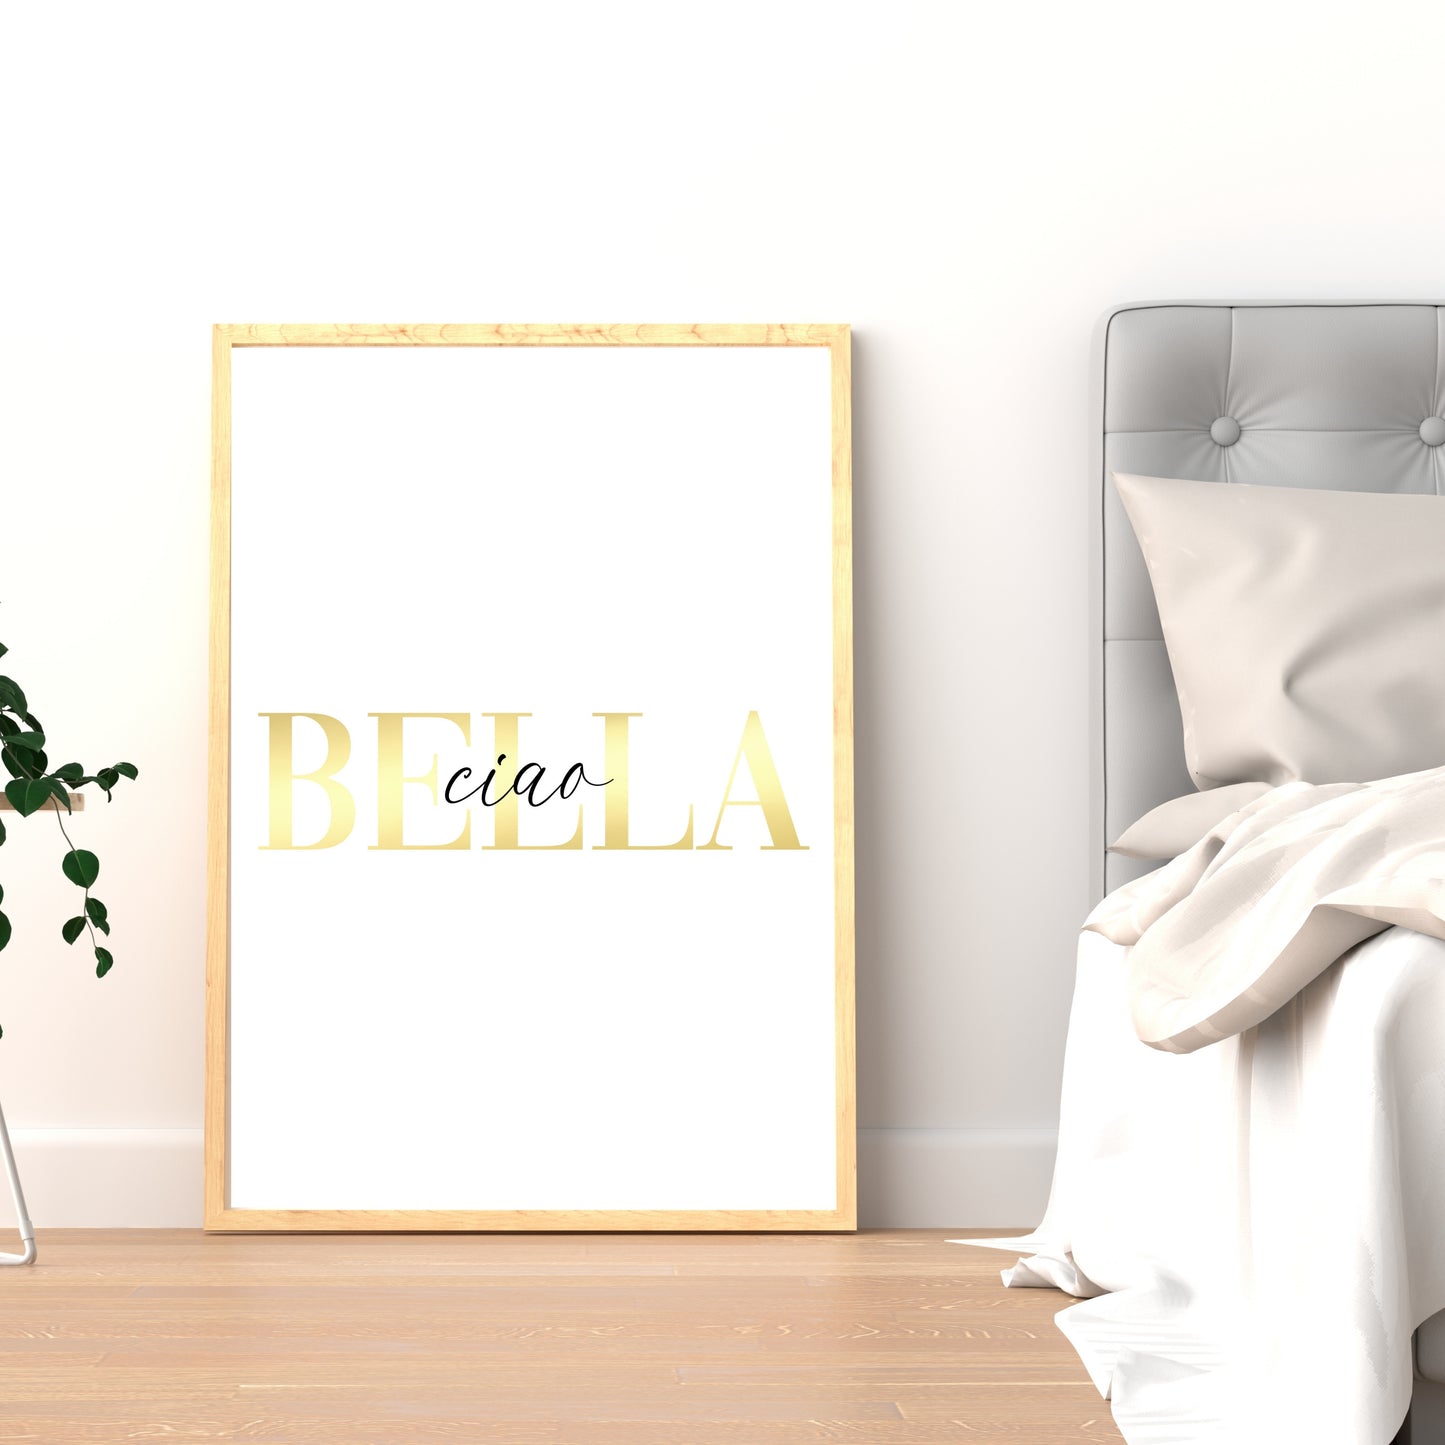 "Ciao Bella" In Black And Gold, Printable Art